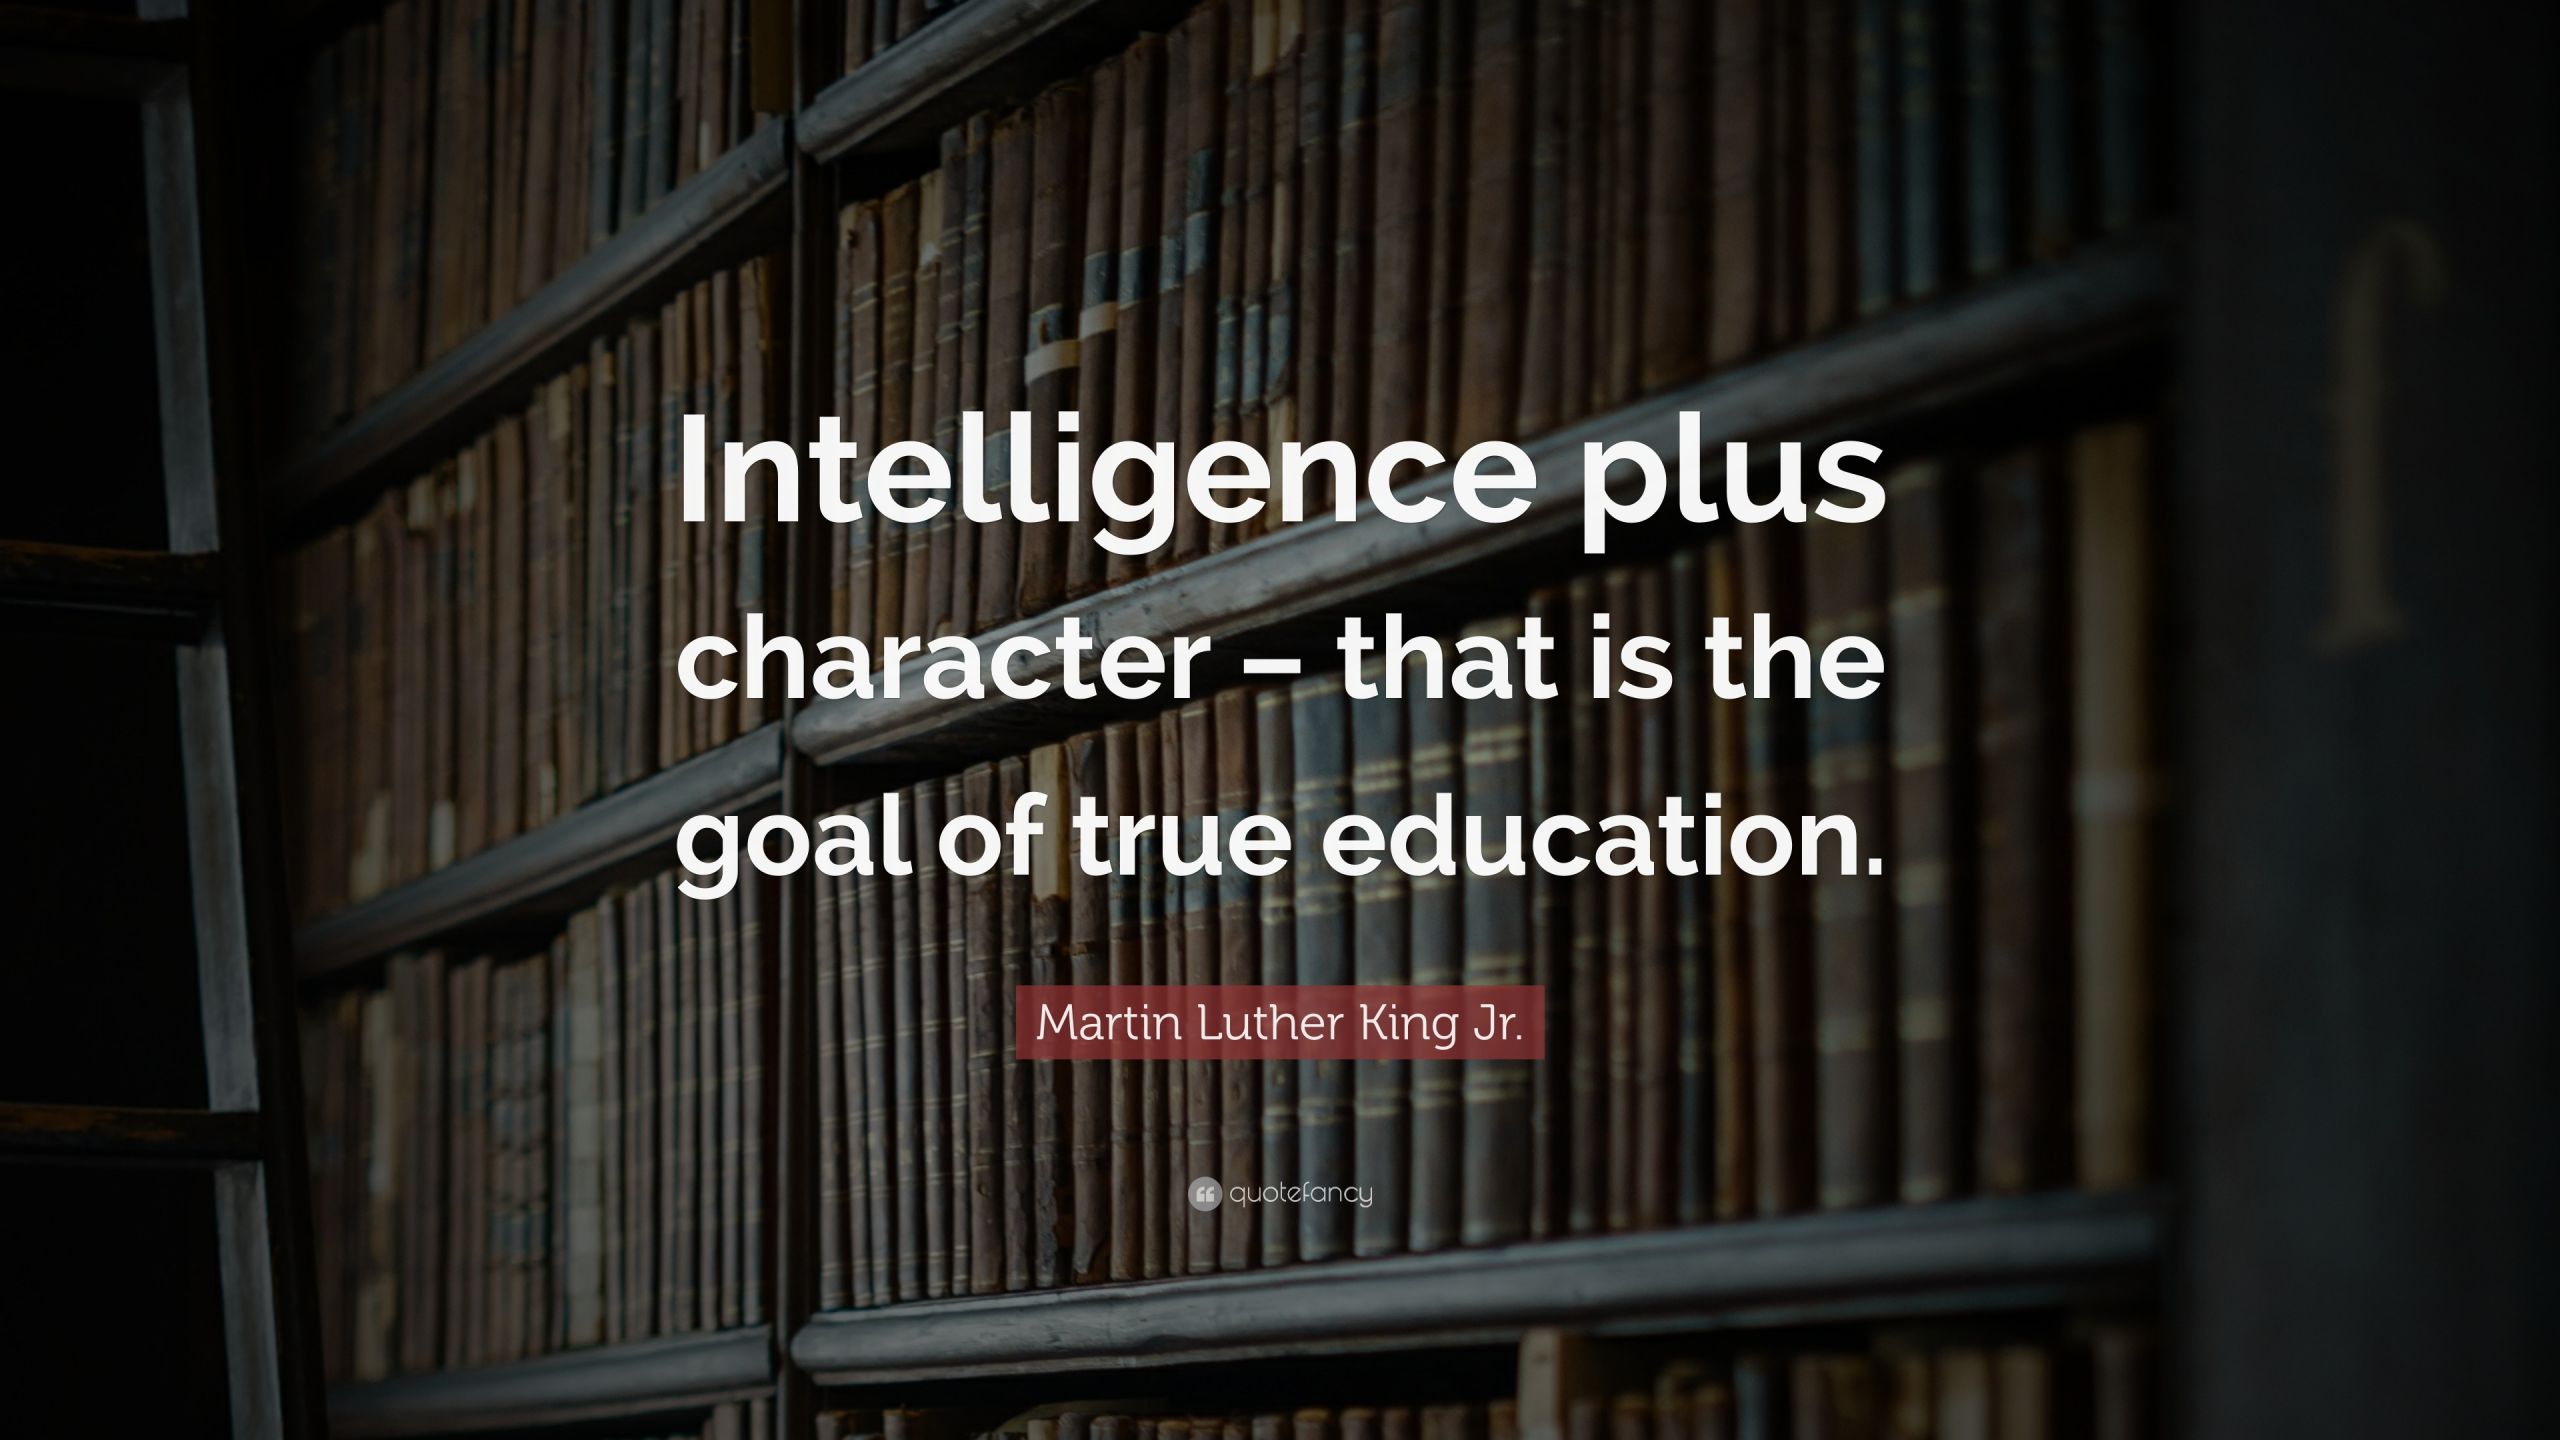 Martin Luther King Jr Quotes Education
 Martin Luther King Jr Quote “Intelligence plus character